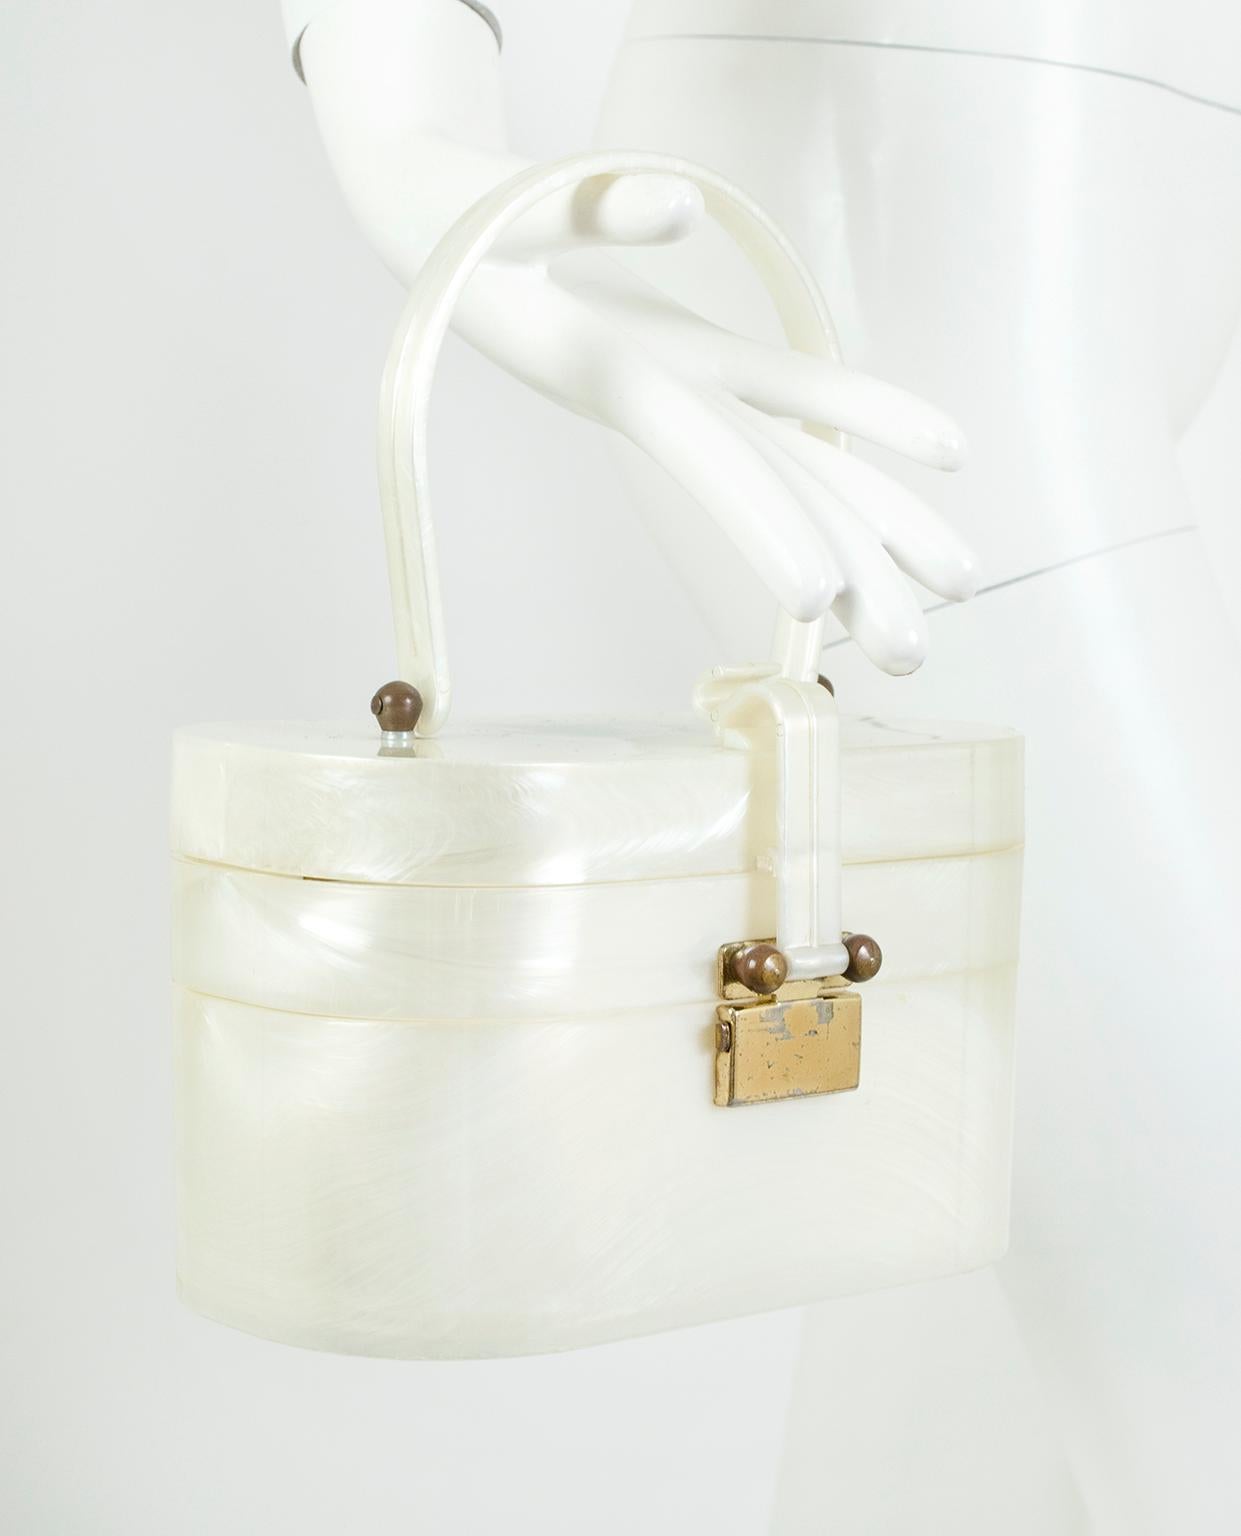 Post-war suburban gold, this nostalgic box purse is a beautiful, functional conversation piece thanks to its sizeable interior and clever double decker design. The Lucite lid flips open to reveal a tray, beneath which is hidden a second